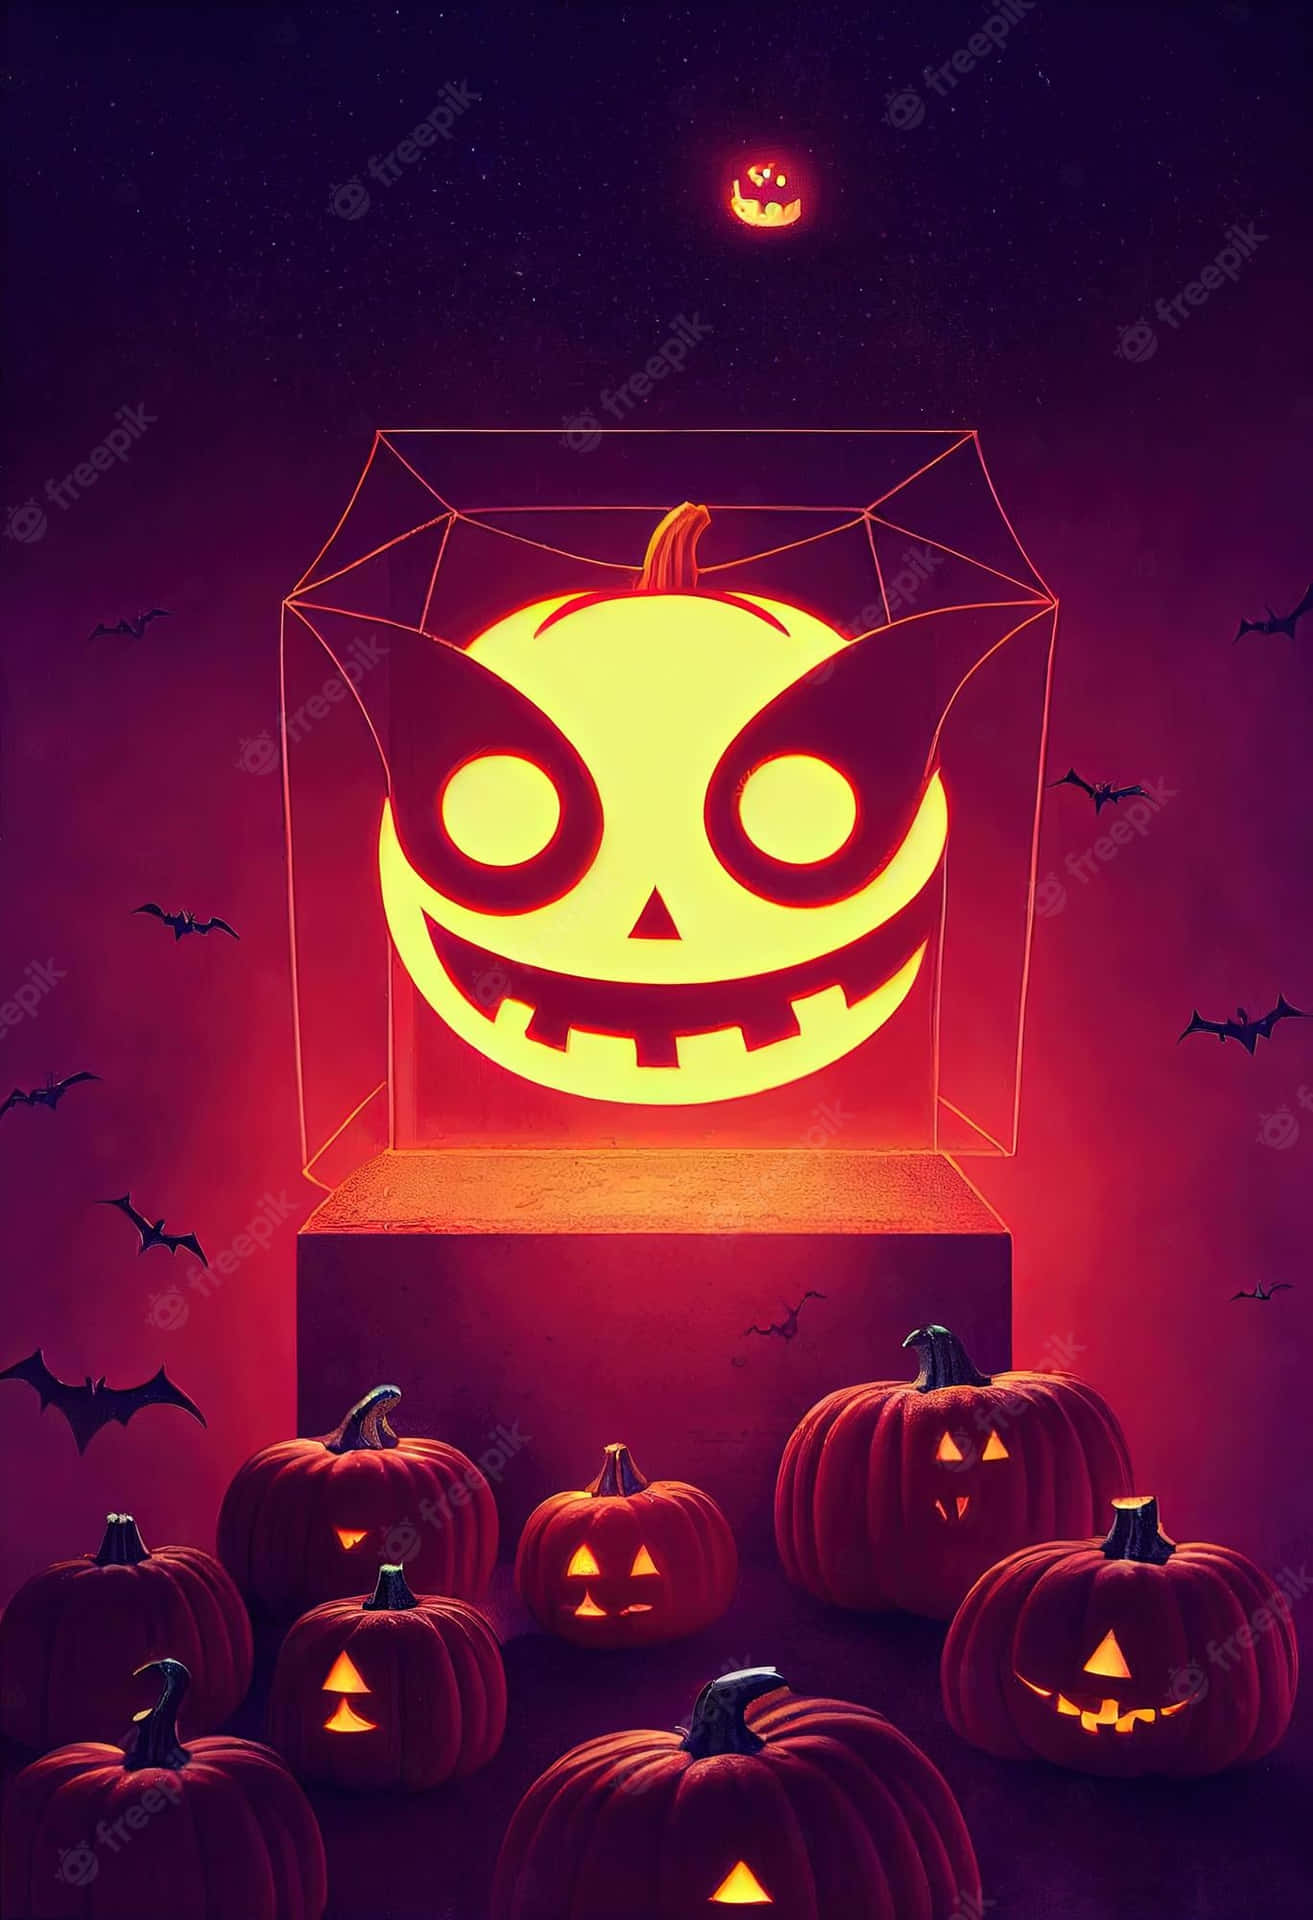 Halloween Pumpkins In A Box With A Glowing Face Wallpaper